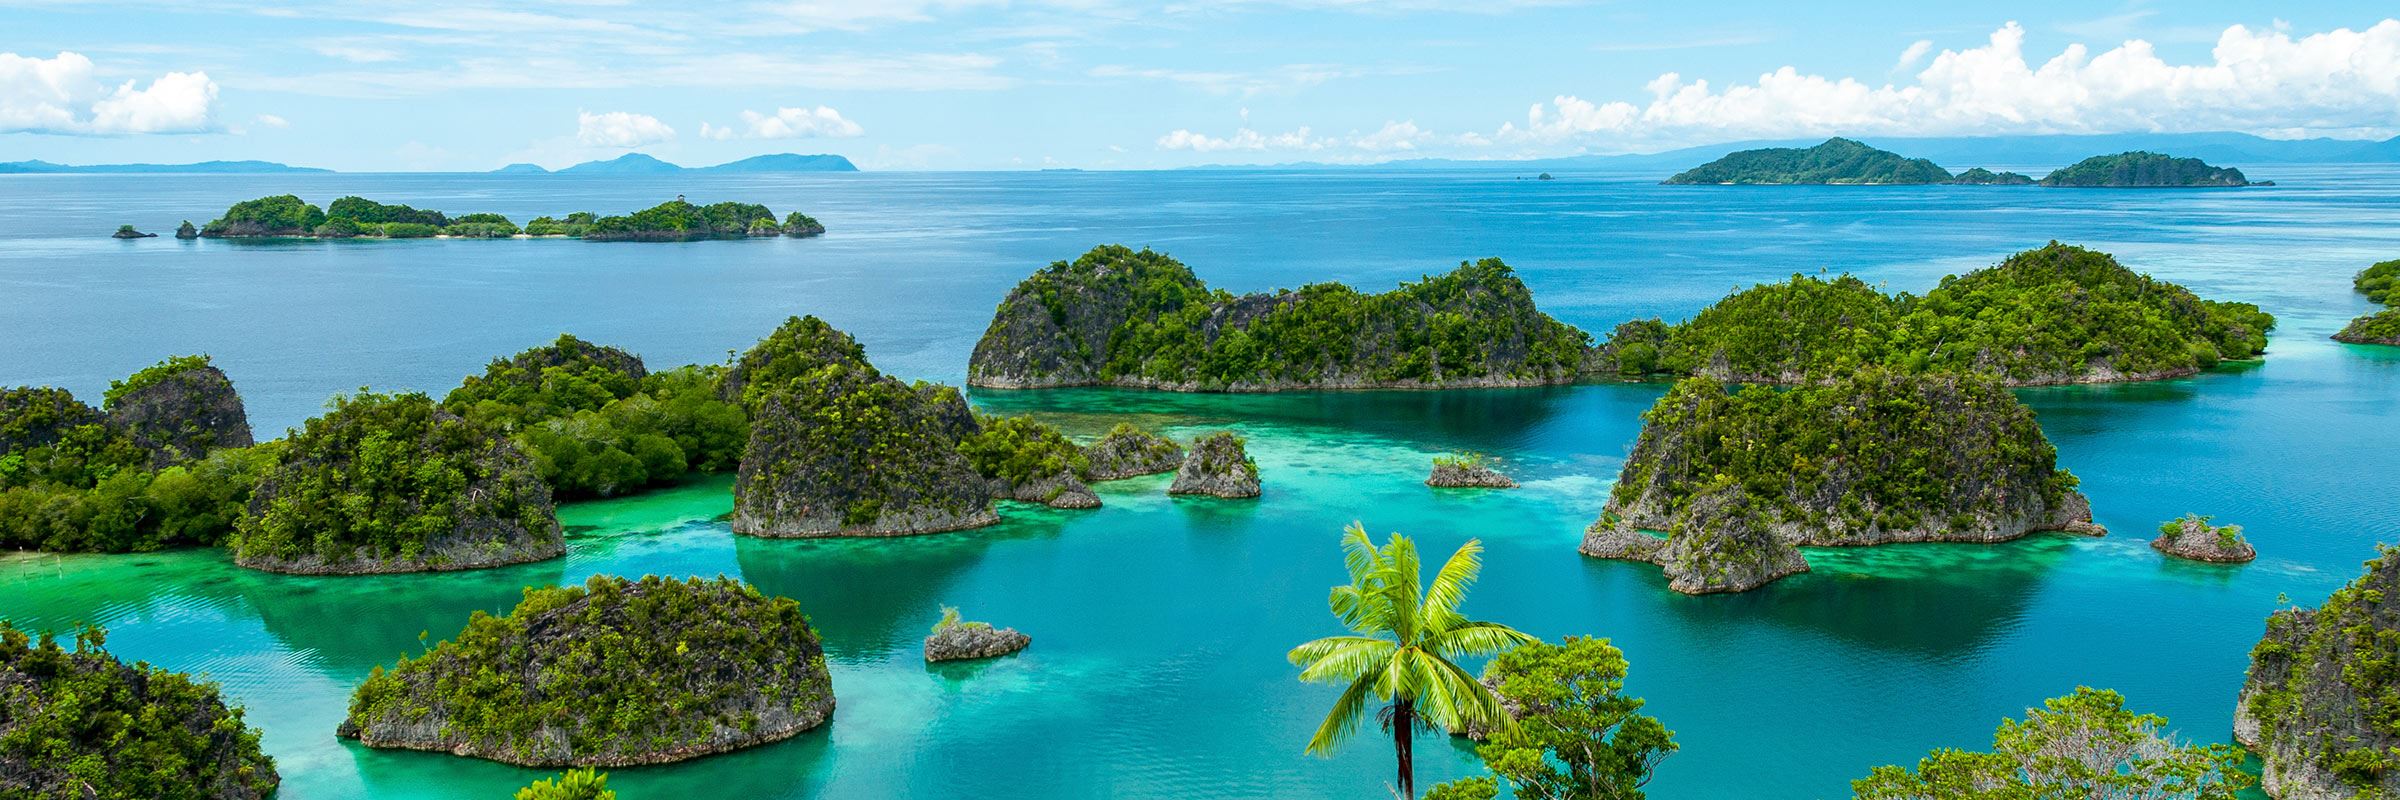 Best Places to Visit in Indonesia - Getinfolist.com